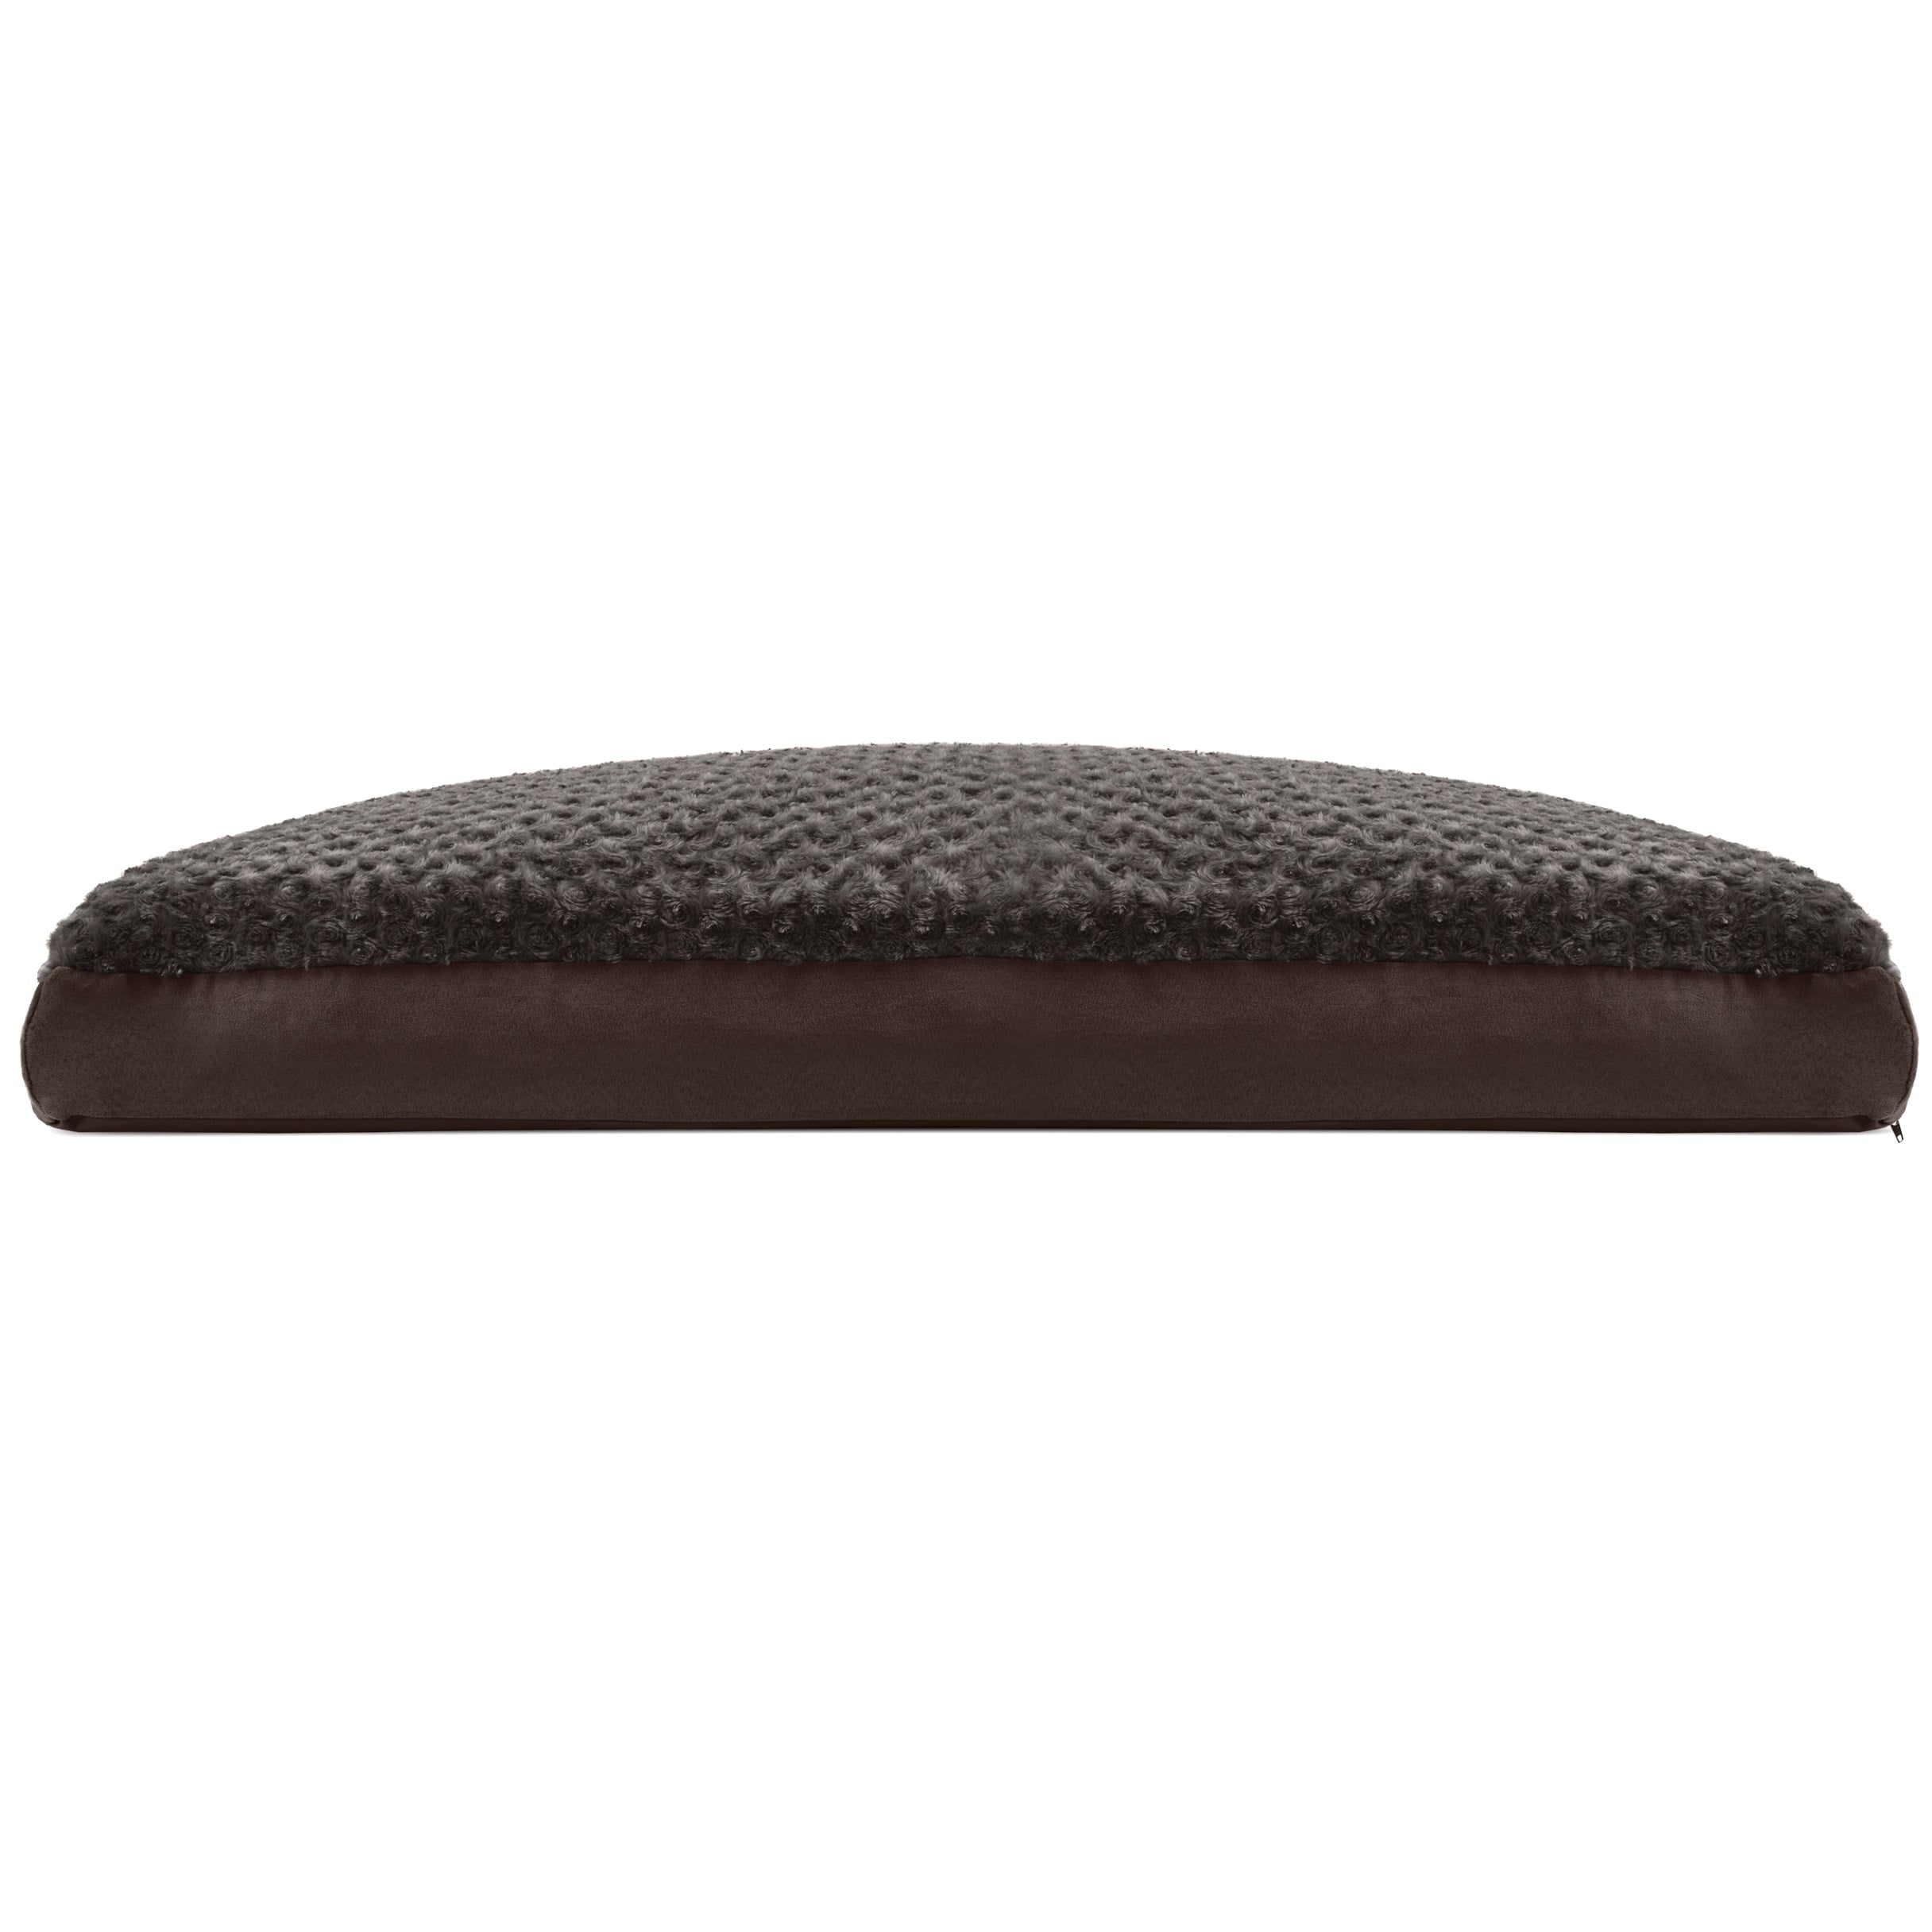 FurHaven Pet Products | Deluxe Plush Pillow Pet Bed for Dogs and Cats， Chocolate， Extra Large